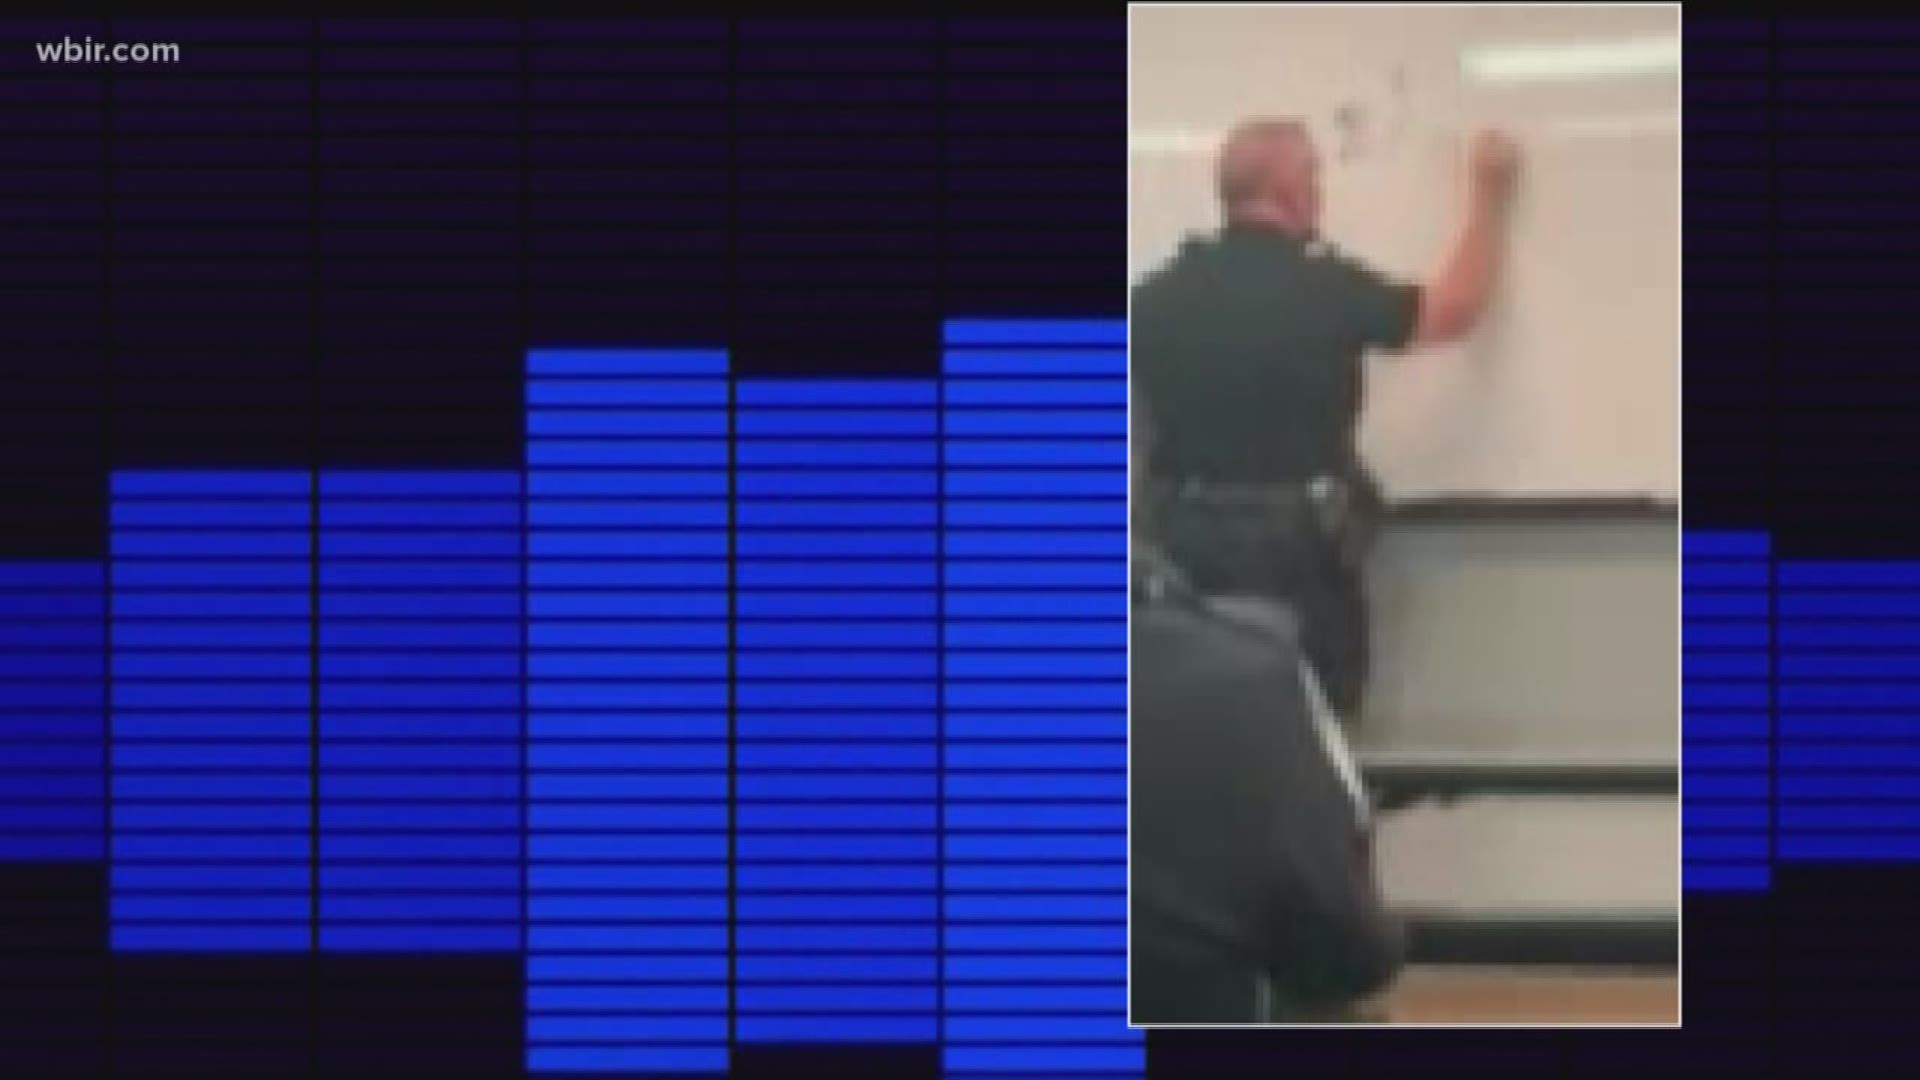 A video is alleged to show KPD Sgt. Bobby Maxwell describing in vulgar and offensive terms how a male officer could have oral sex with a female. On the video he could be heard using terms like "choke job" and "pearl necklace".